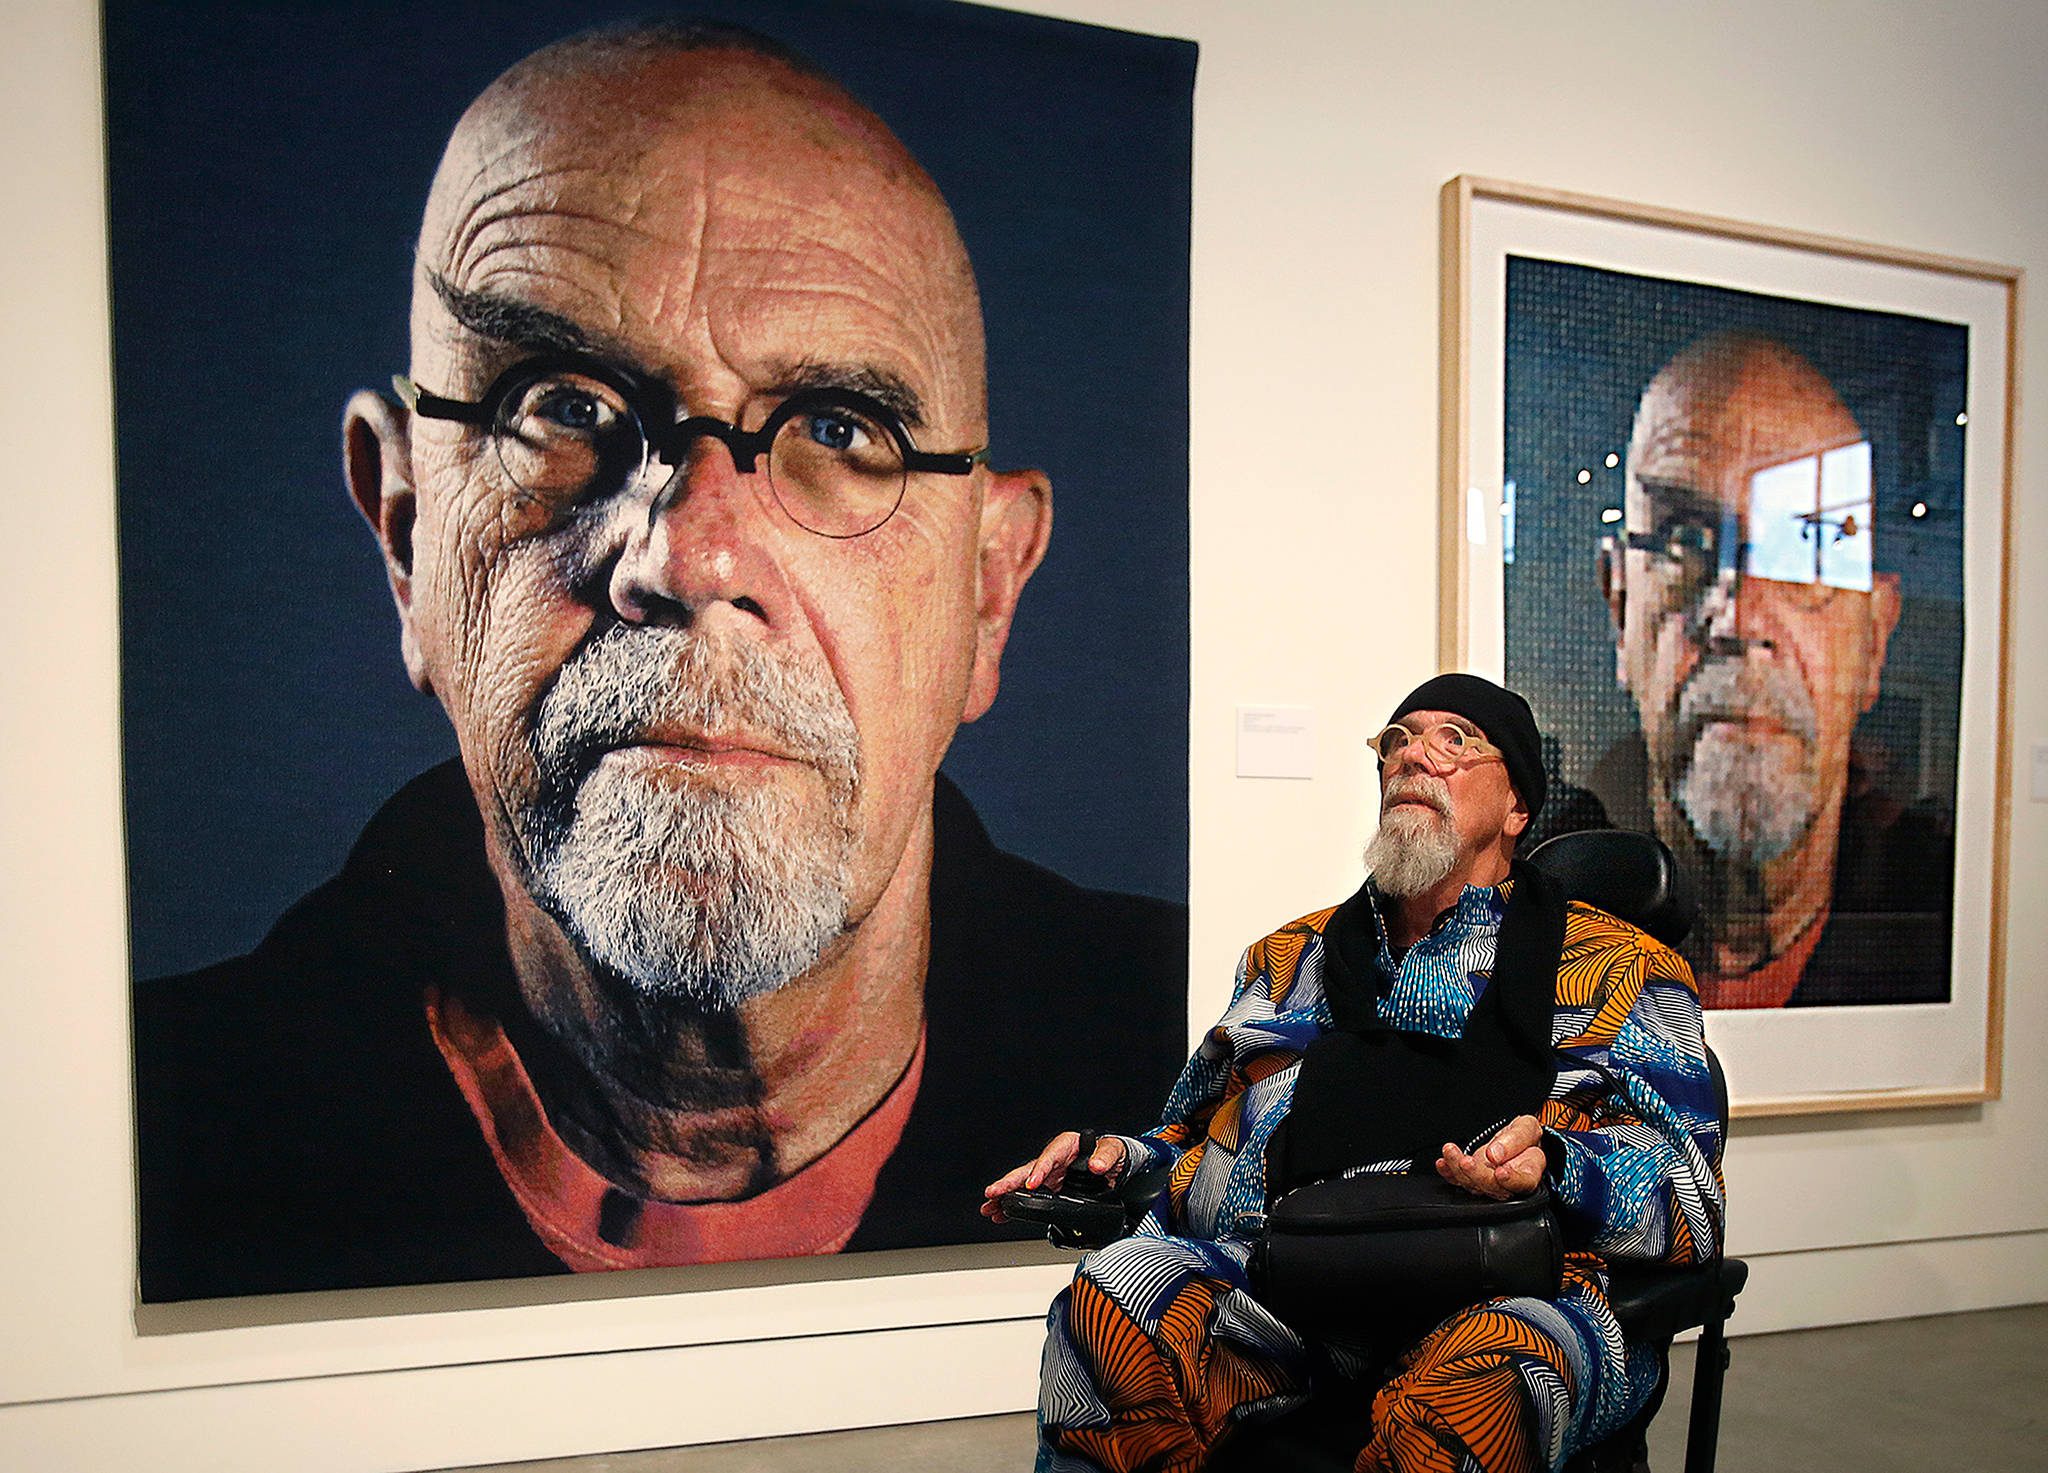 Snohomish County native Chuck Close, who had an exhibition at the Schack Art Center in Everett in 2016, has been accused of sexual misconduct. (Dan Bates / Herald file)